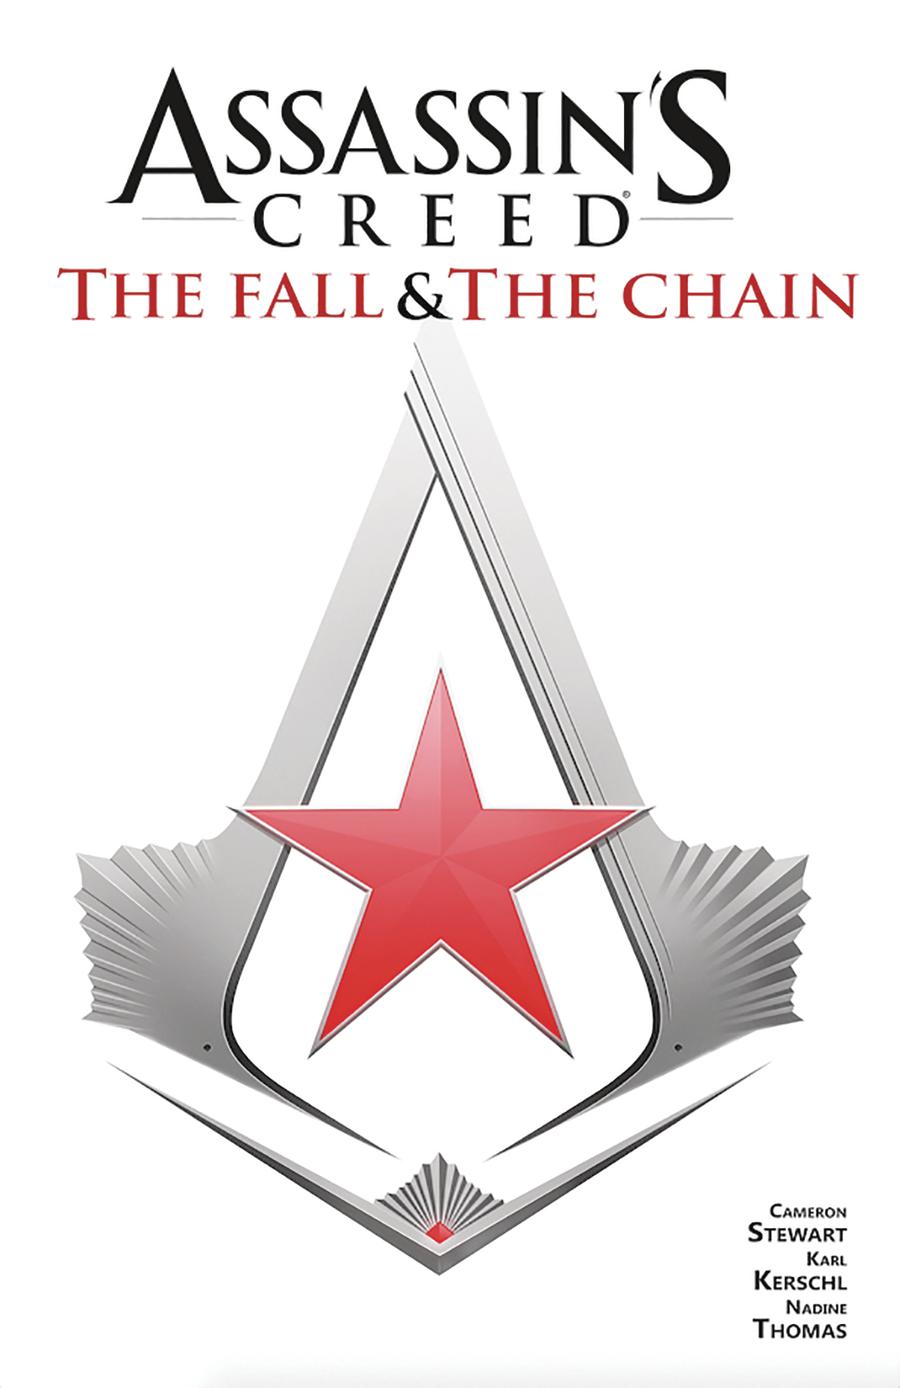 Assassins Creed The Fall & The Chain TP